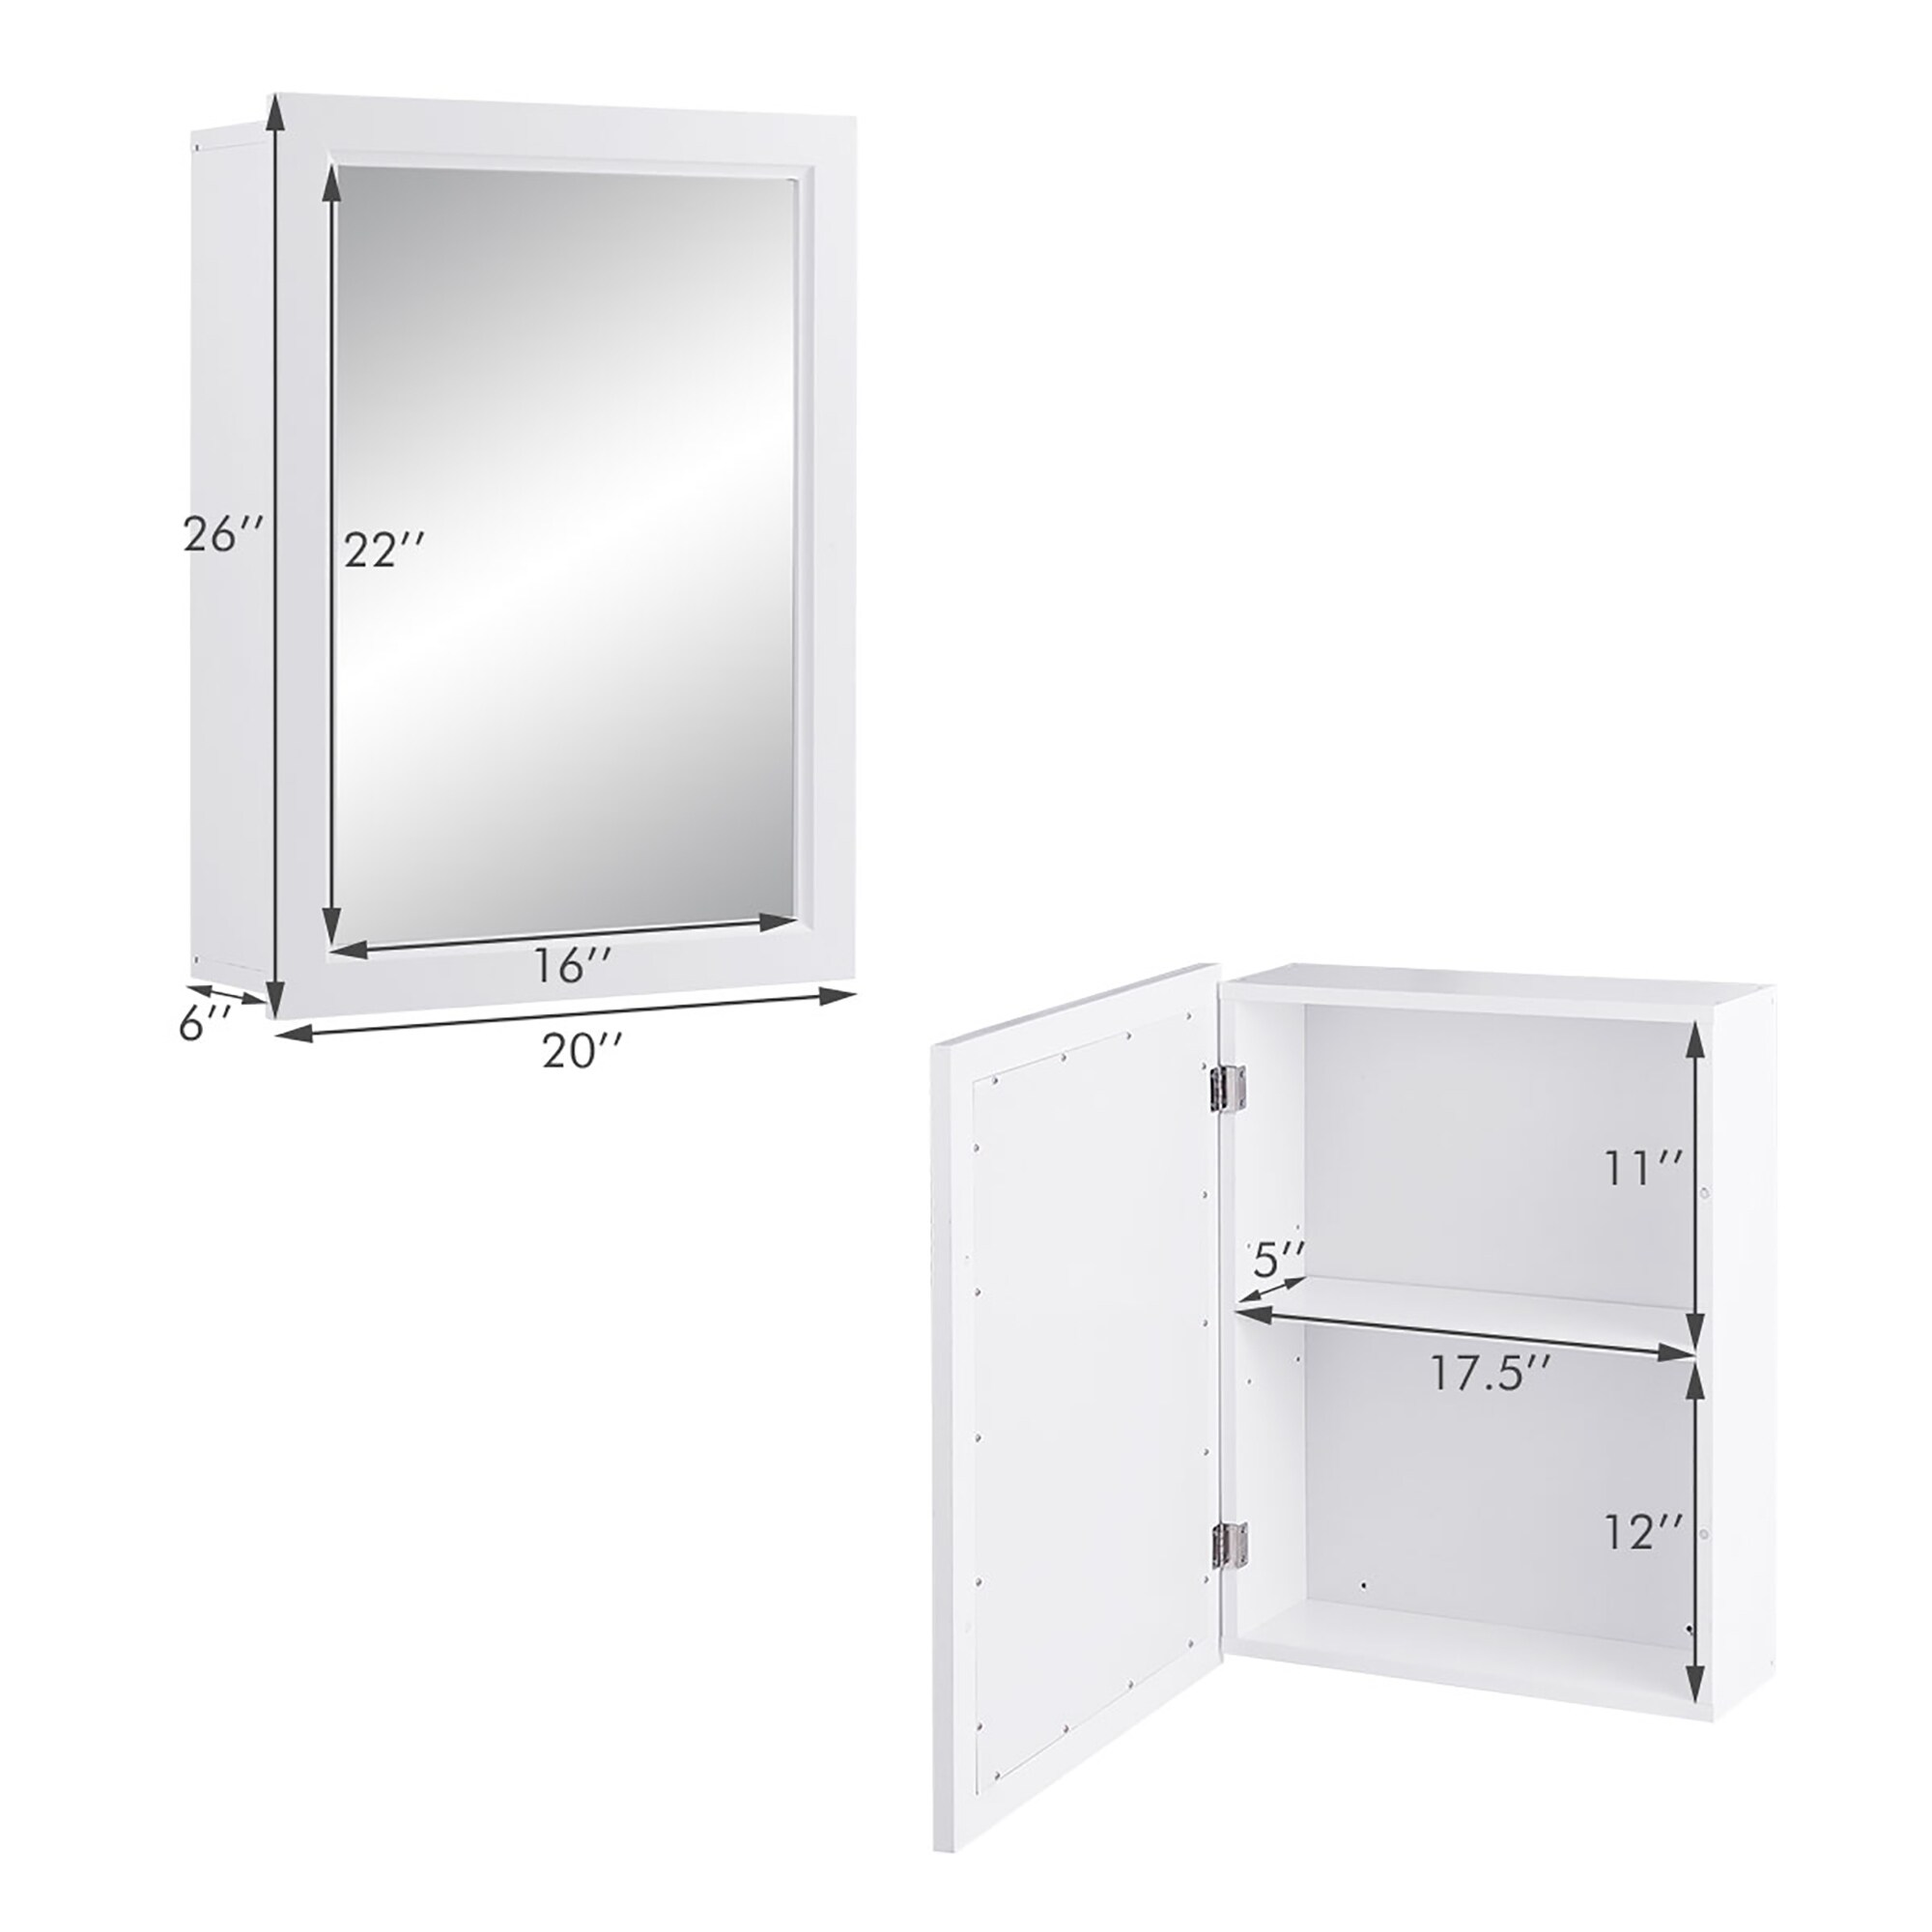 https://ak1.ostkcdn.com/images/products/is/images/direct/753fad4432b8ac55d1f21fe7075c1781b783d6a3/Bathroom-Cabinet-Mirrored-Wall-Mounted-Storage-Medicine-Cabinet.jpg